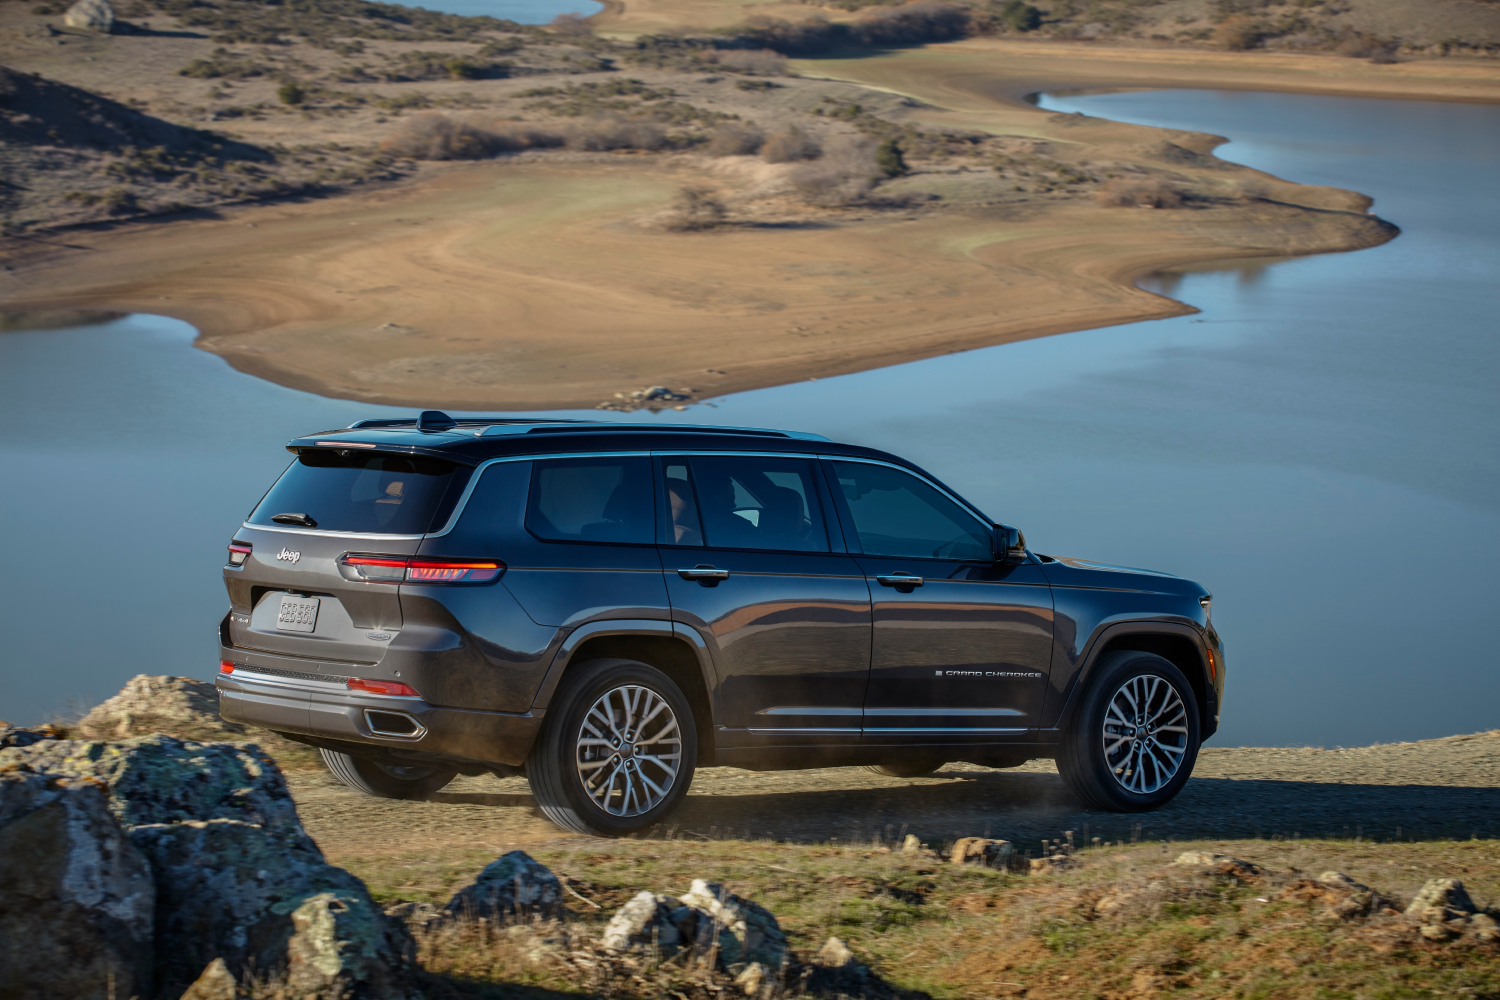 Consumer Reports doesn't recommend the 2022 Jeep Grand Cherokee L